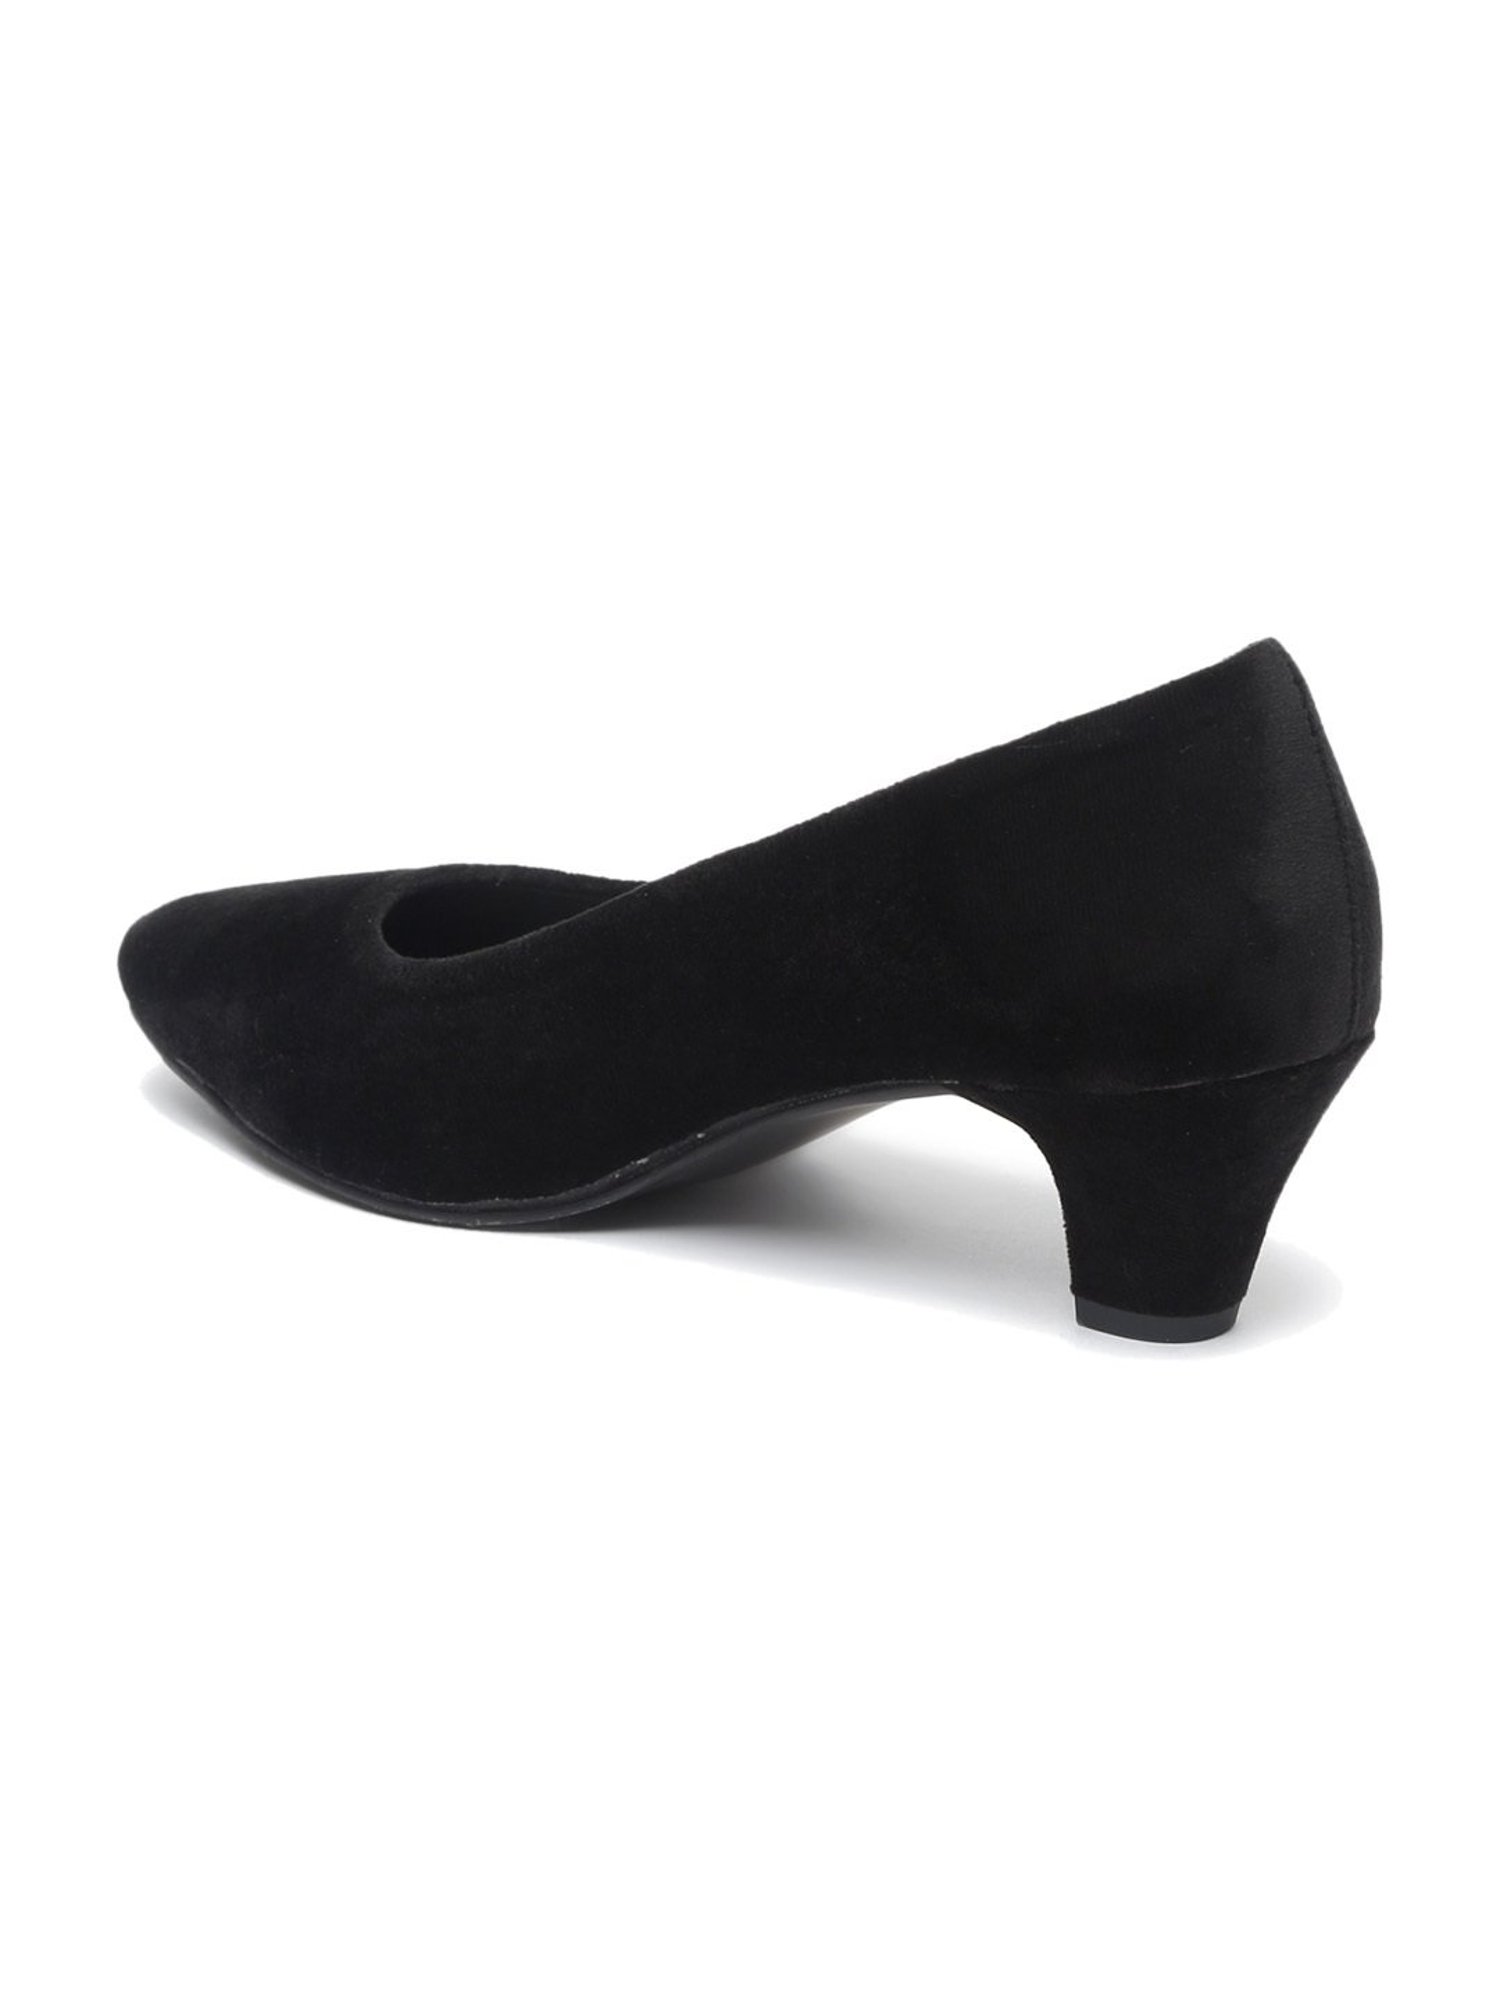 Buy Black Heeled Shoes for Women by GLOBAL STEP Online | Ajio.com